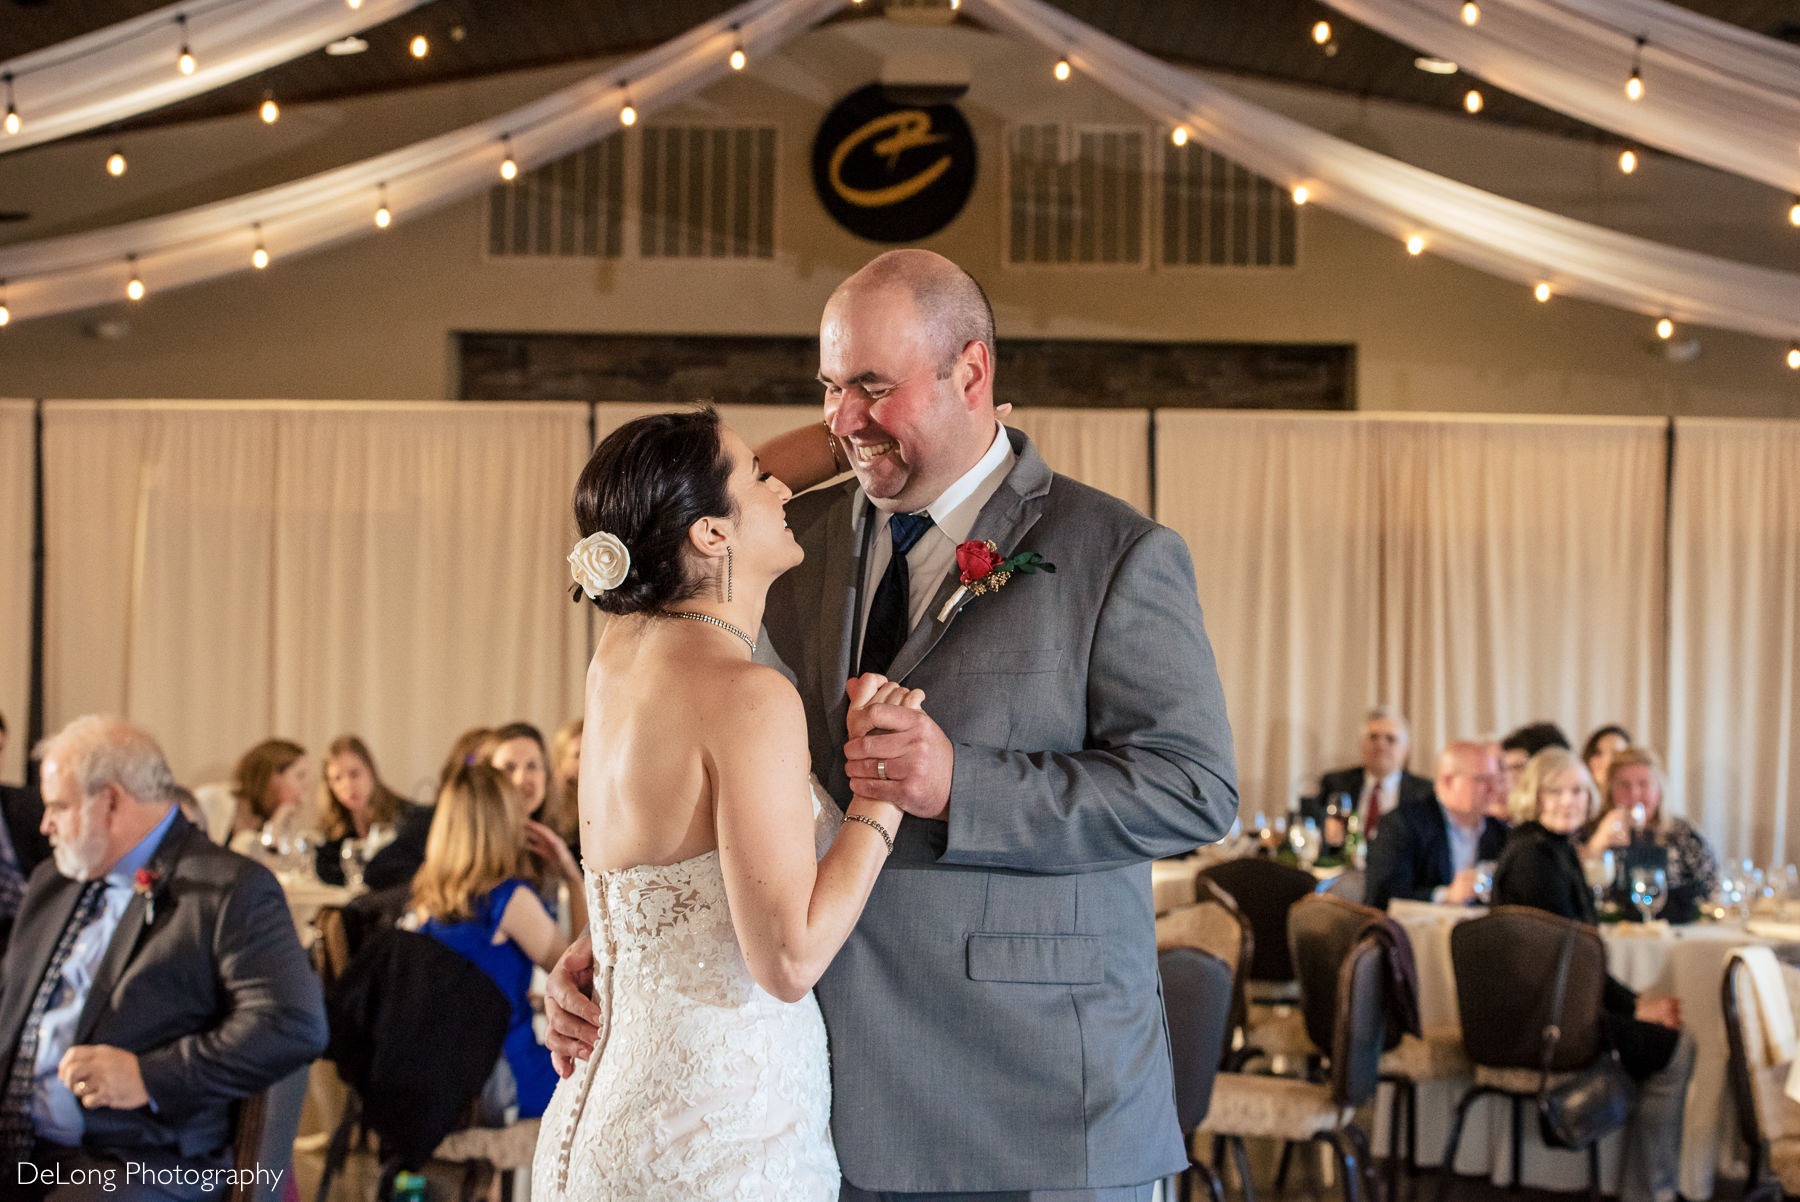 Bride and groom first dance at Childress Vineyards by Charlotte Wedding Photographers DeLong Photography